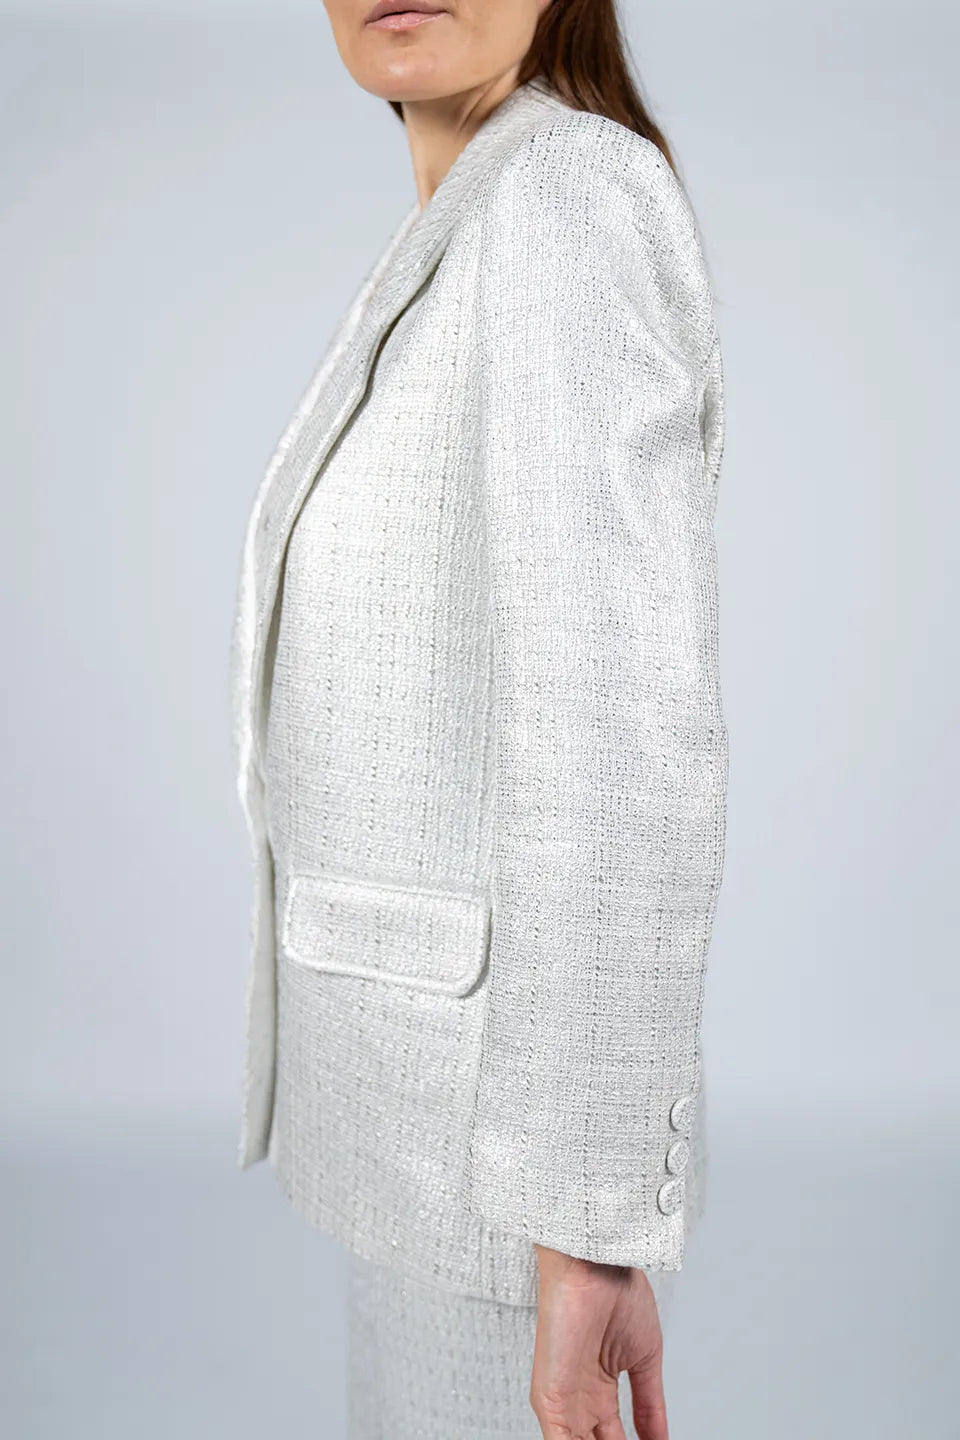 Designer Silver Women blazers, Jacket, shop online with free delivery in UAE. Product gallery 3